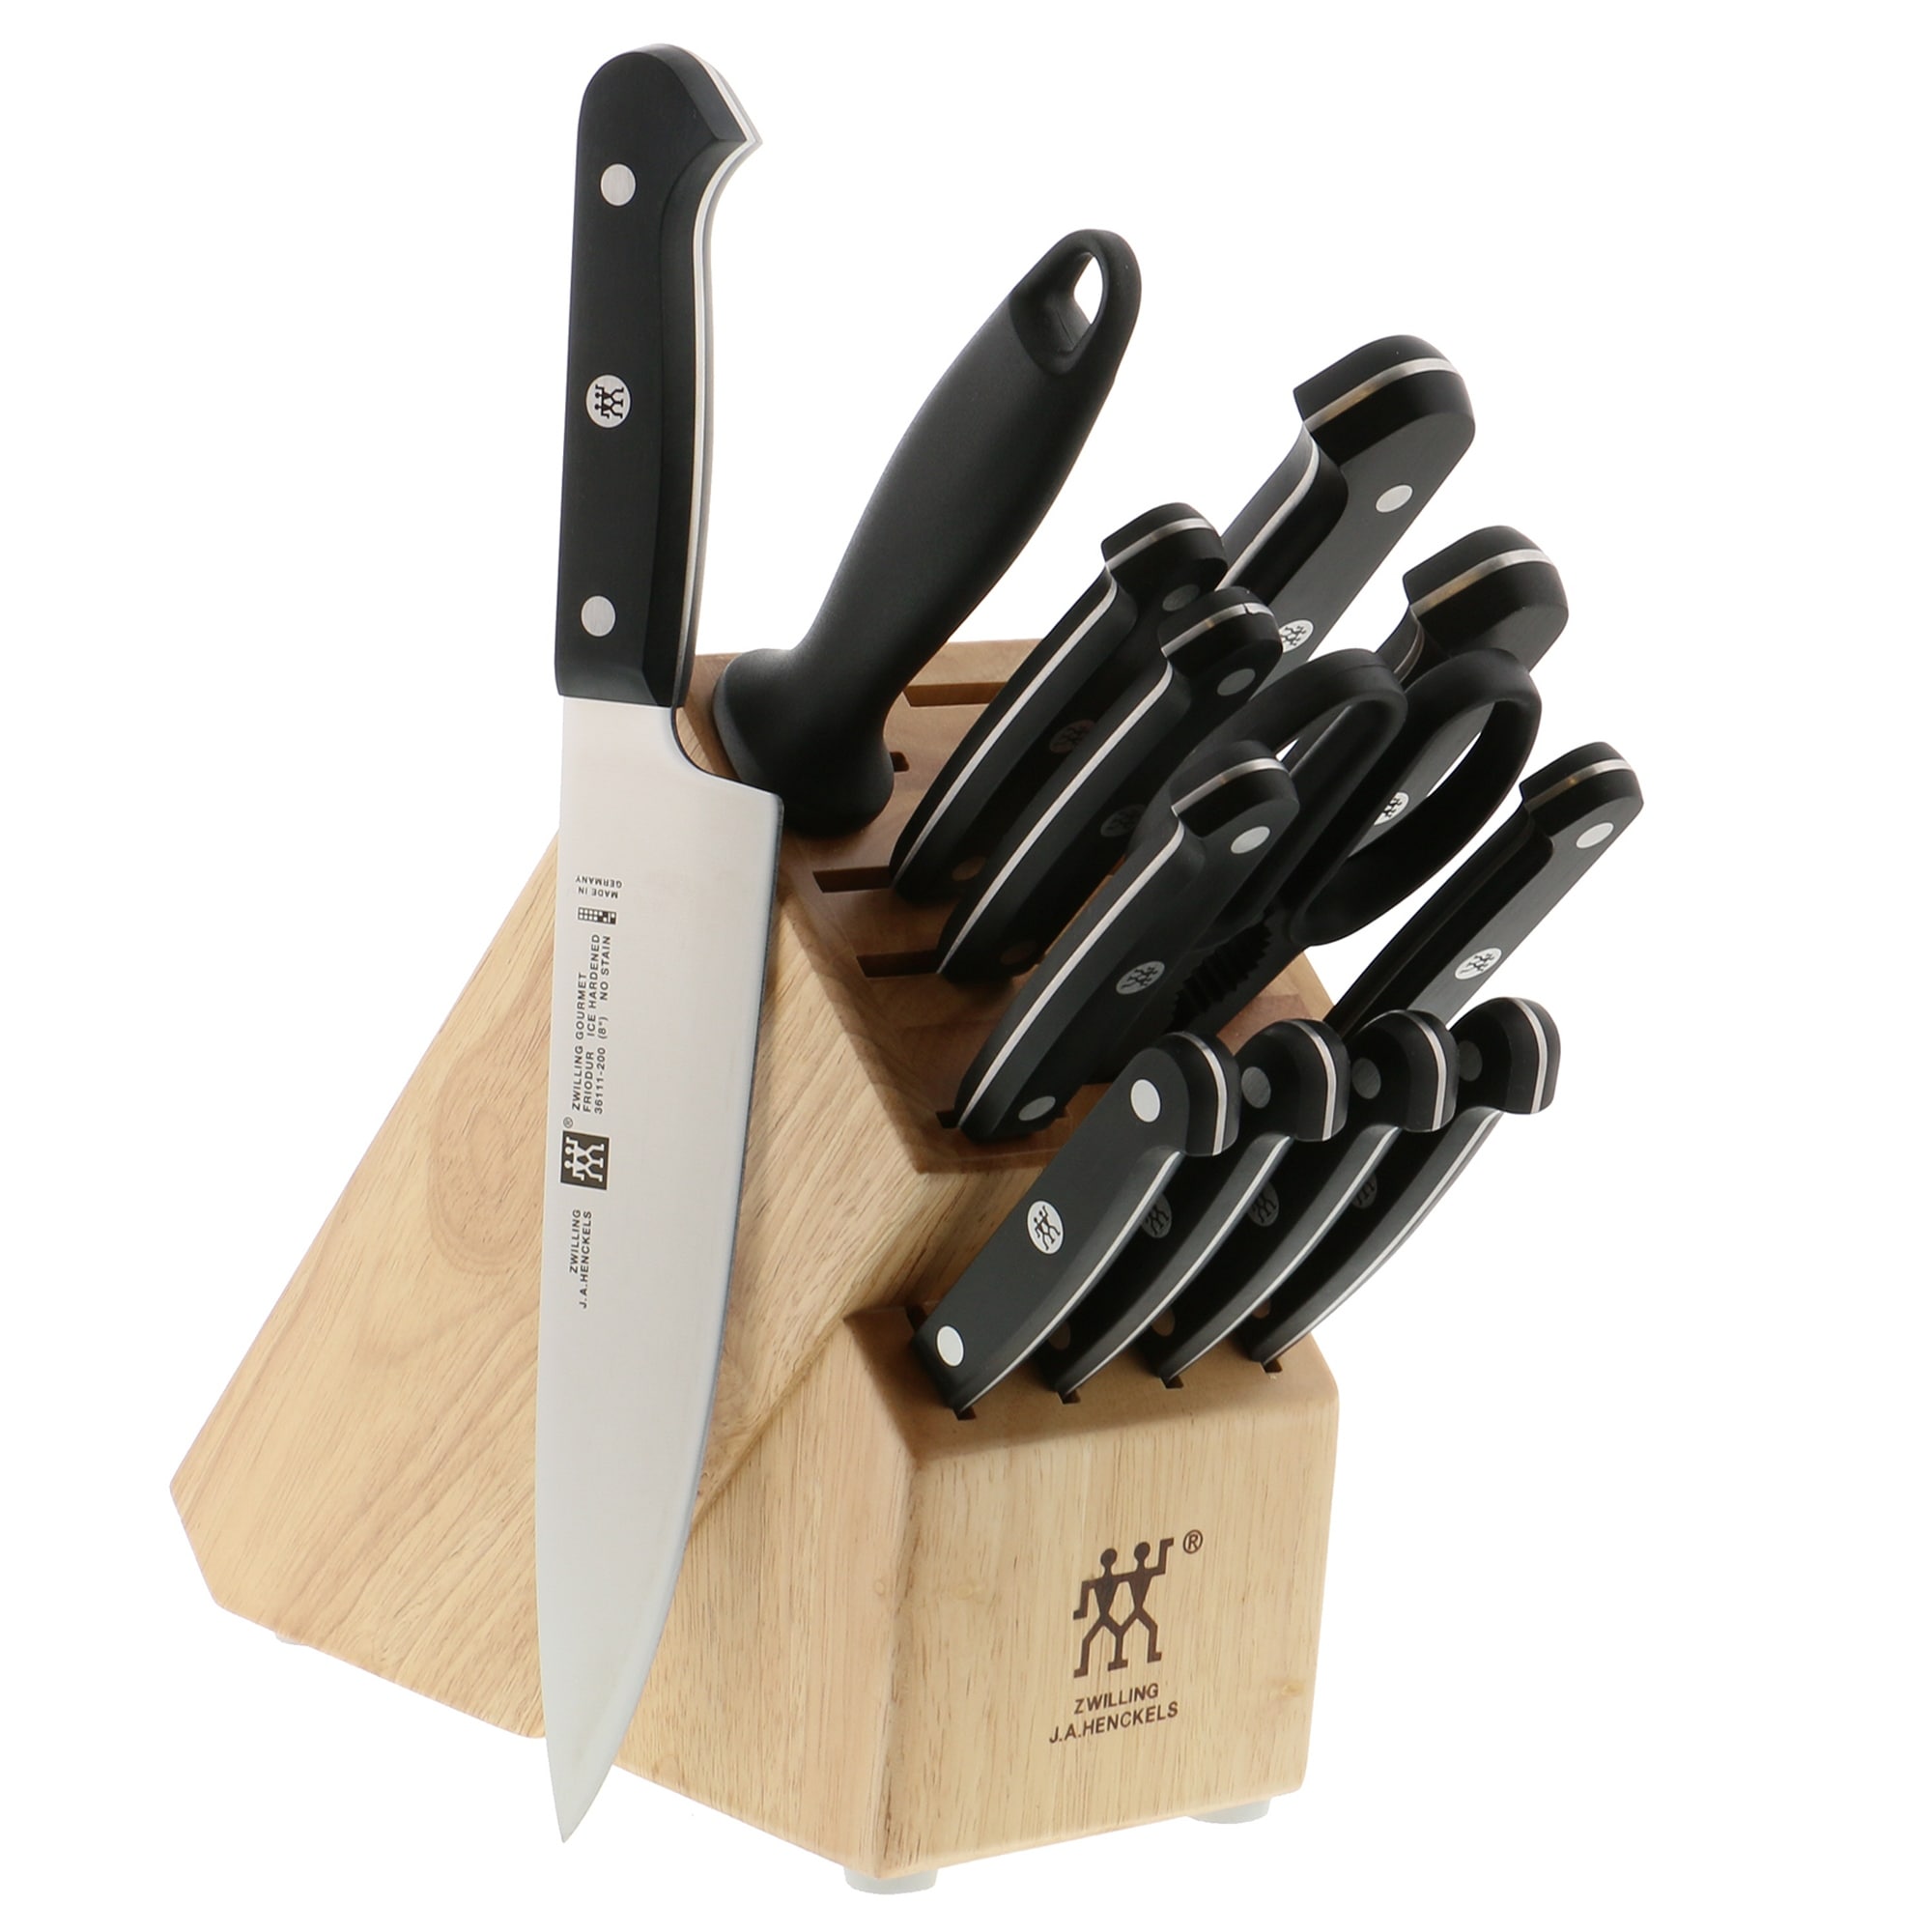 https://ak1.ostkcdn.com/images/products/is/images/direct/ce7237453834443e23f02b6a081a4e9e4e02c25a/ZWILLING-Gourmet-14-pc-Knife-Block-Set.jpg